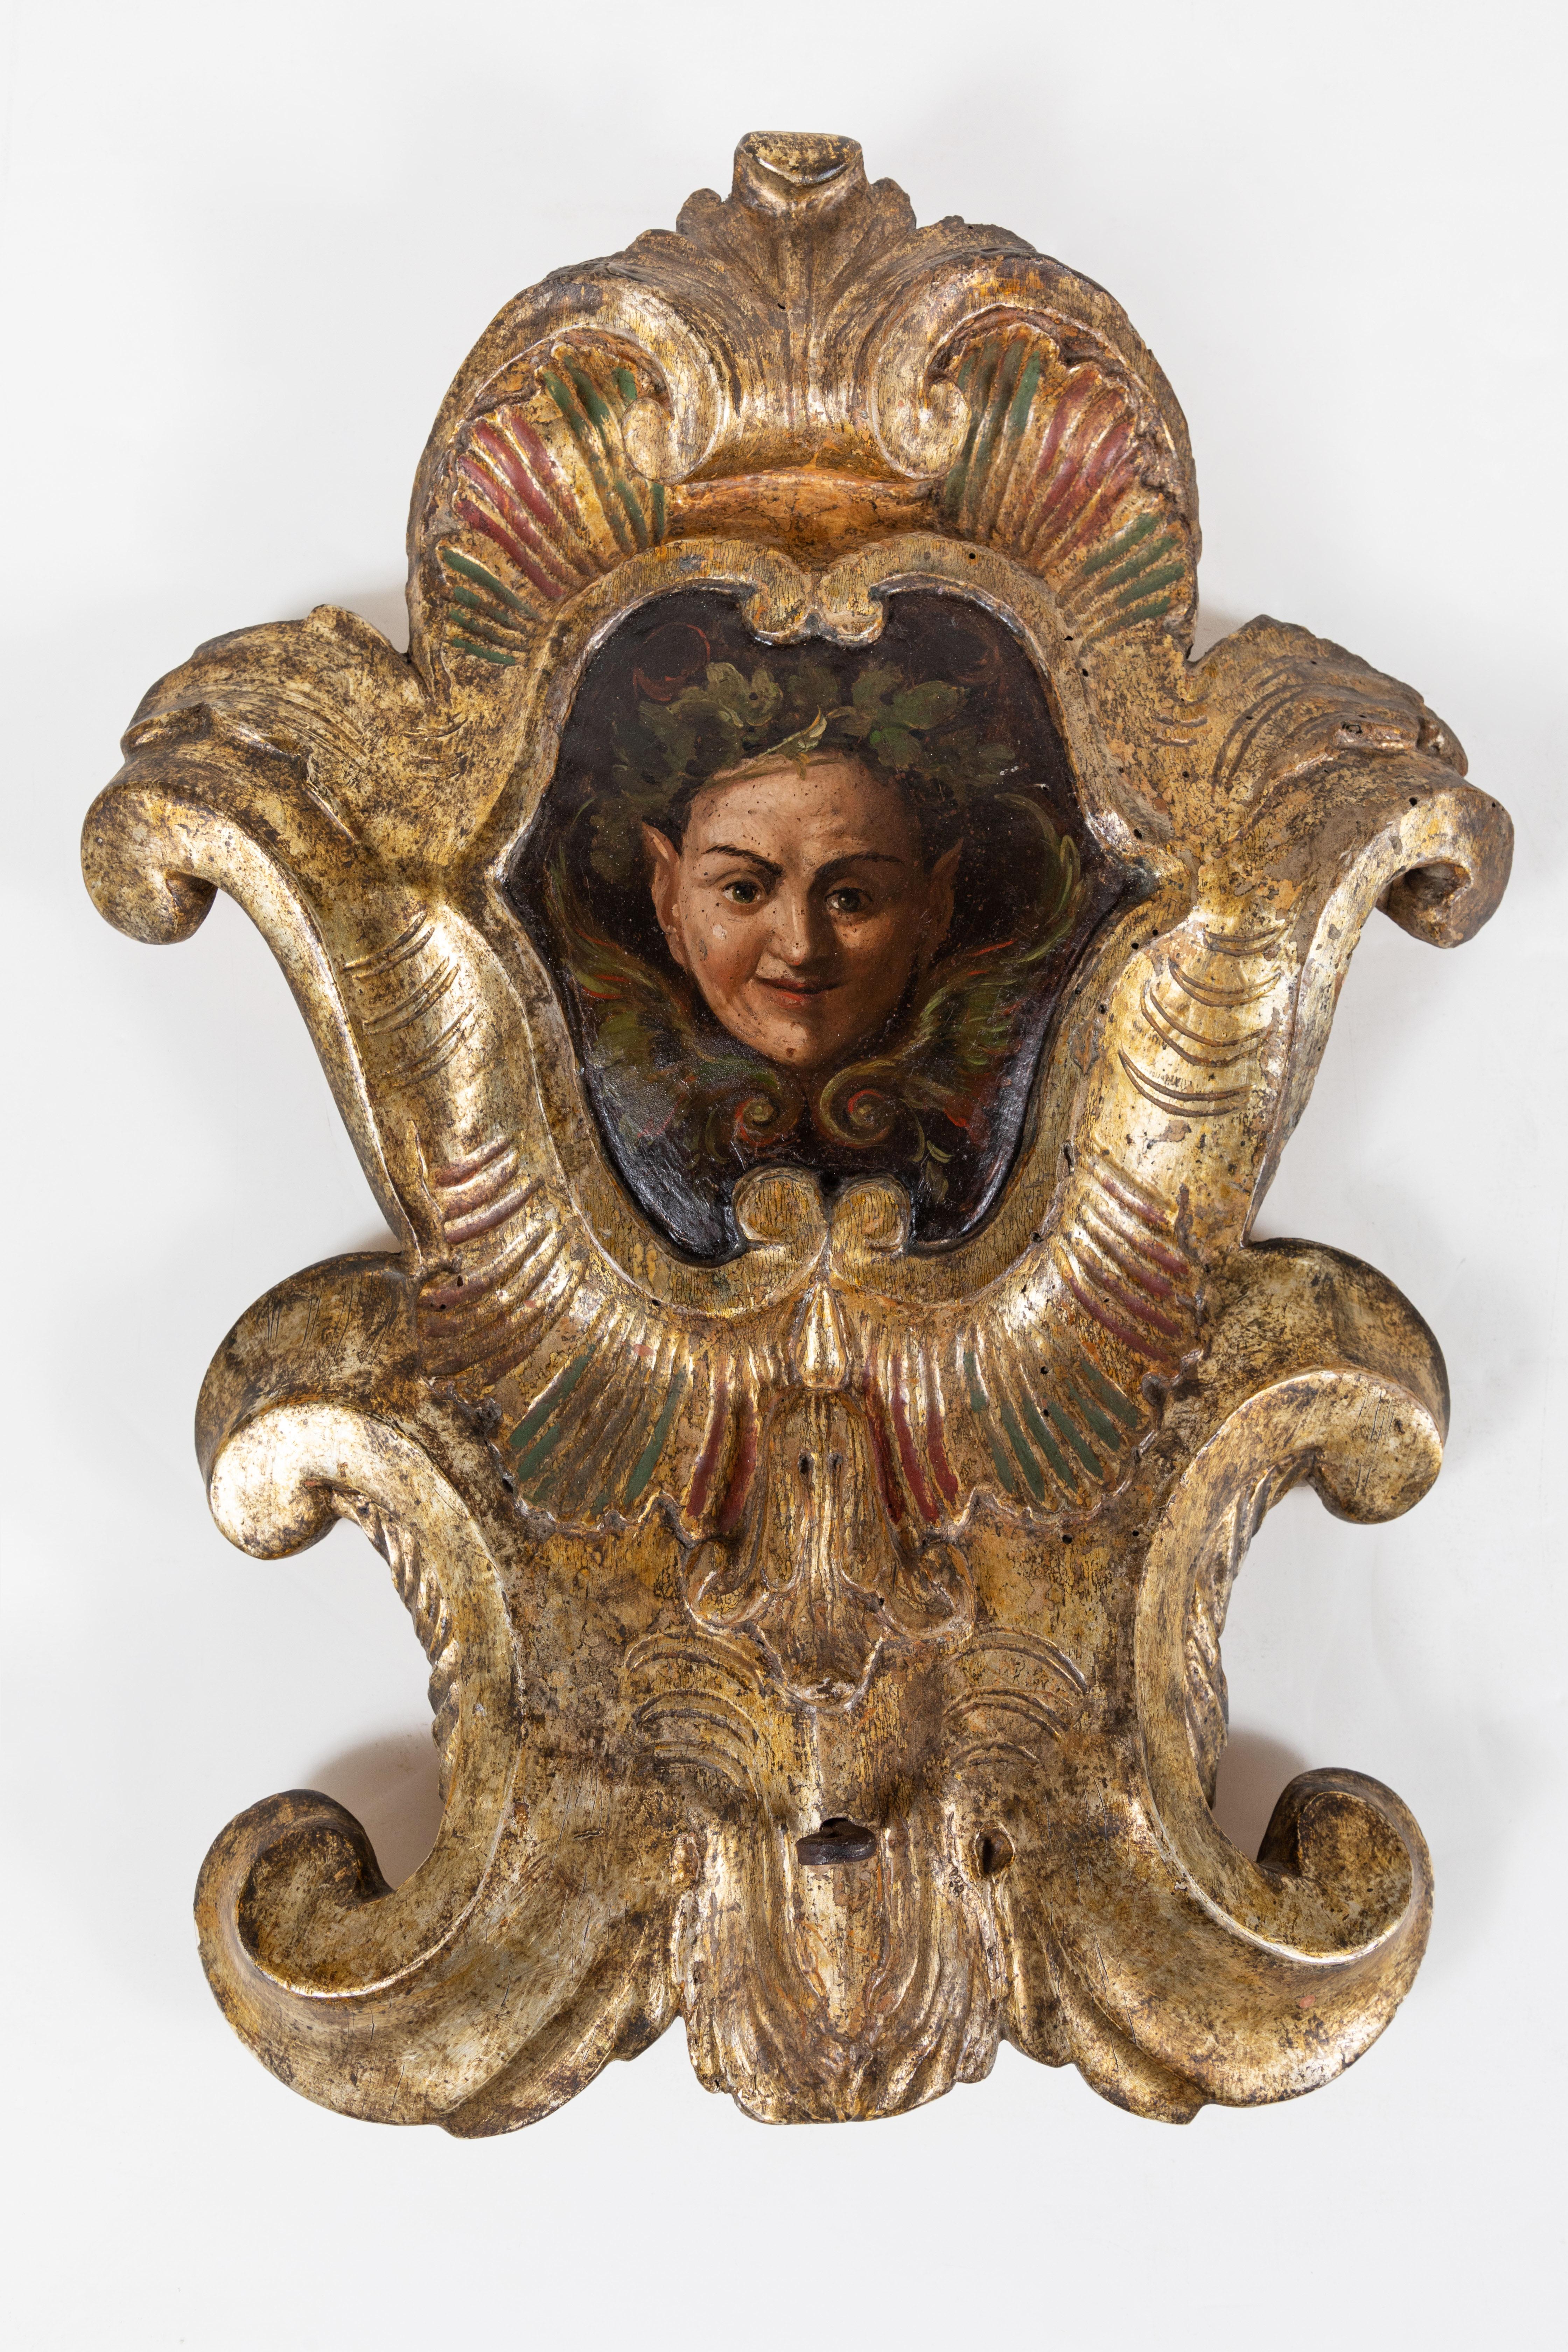 Charming, early 19th century, hand carved, gessoed, and 22-karat gold gilded, polychrome wall plaques featuring nature spirits surrounded by foliate wreaths. Each with wonderful, mischievous expressions.